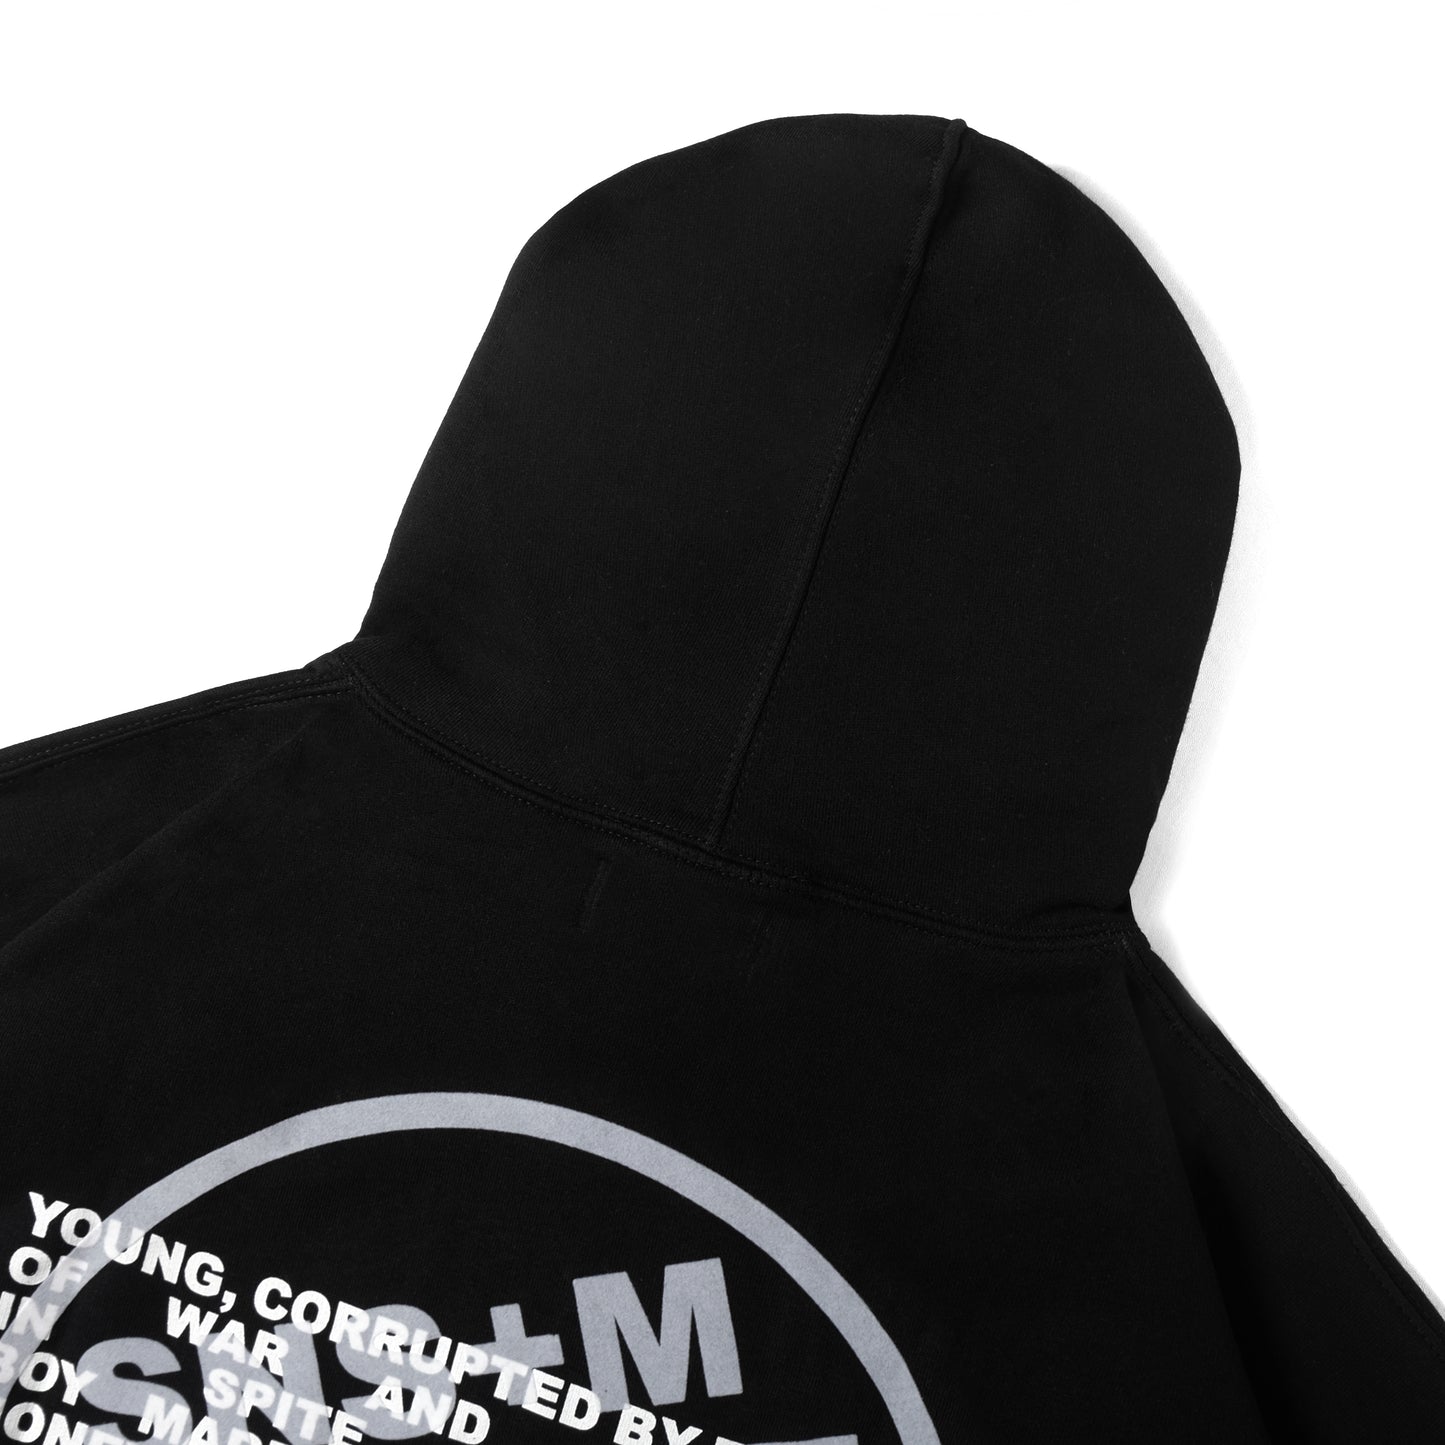 Miracle Mates - Motion Black Zipper Boxy Hoodie Collaboration SNSB